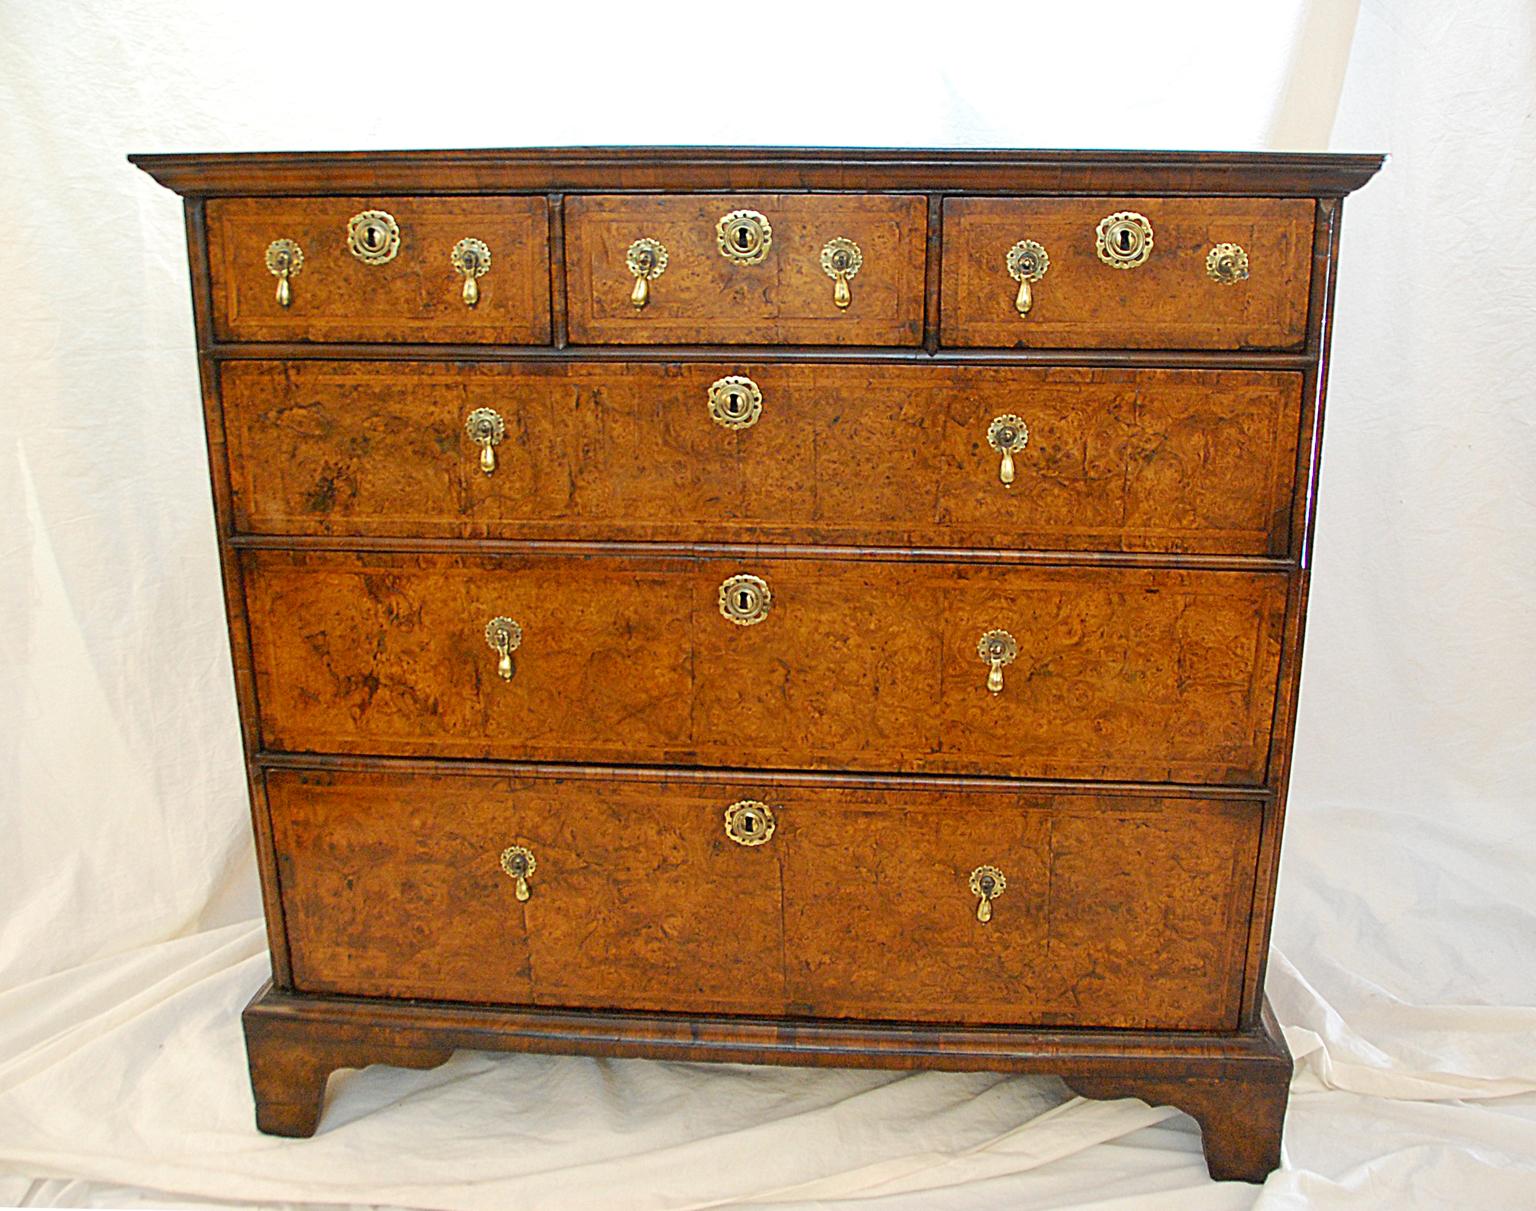 English Queen Anne period chest of six drawers in walnut with burr elm drawer fronts. The top is quartered and veneered in bookmatched walnut with herringbone banding and wide crossbanding. The drawer fronts are veneered in pollard elm which